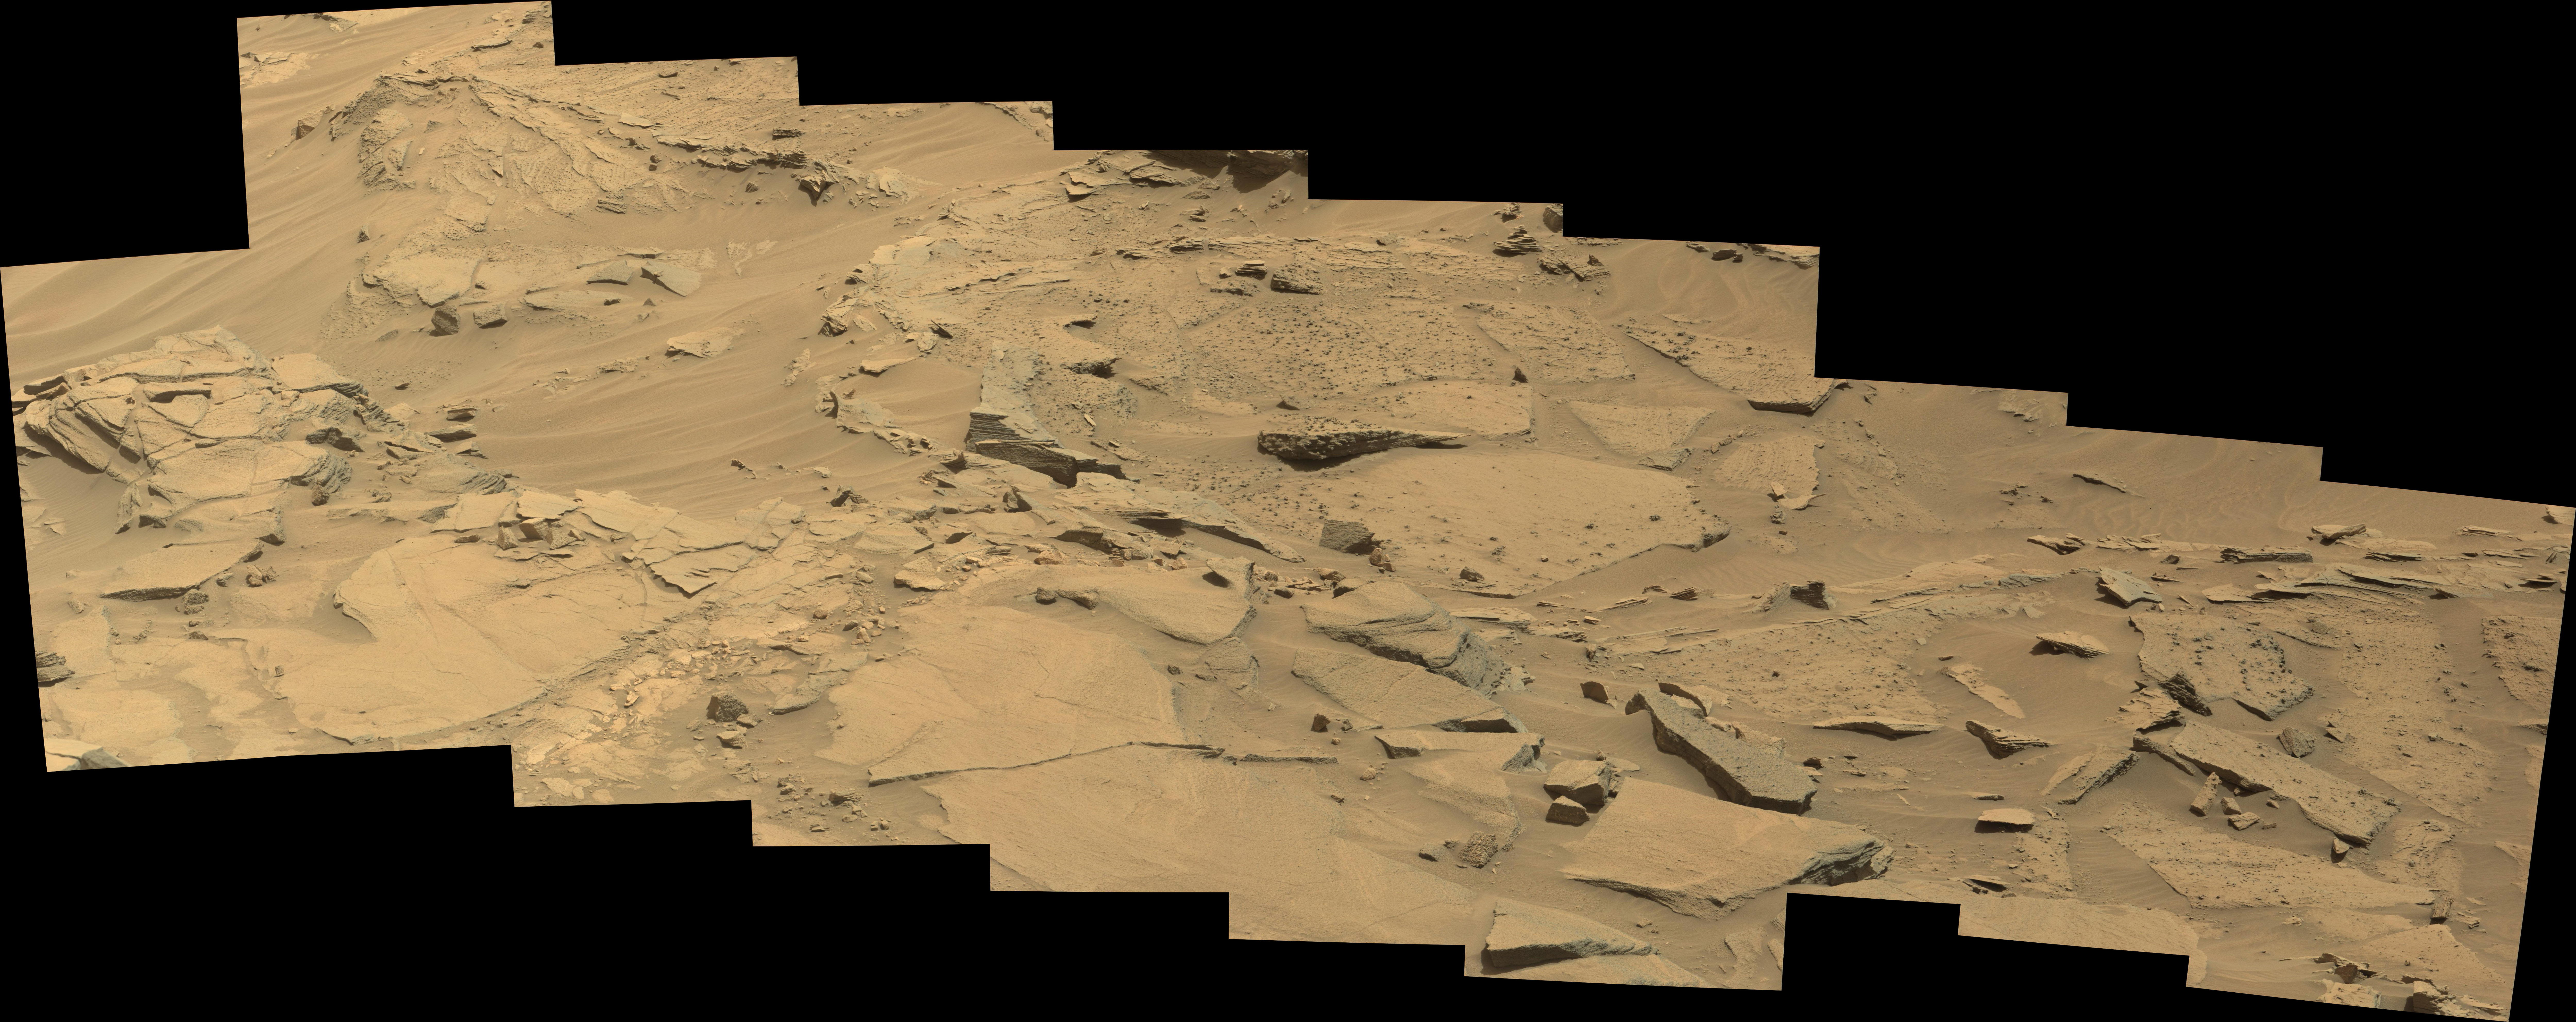 panoramic curiosity rover view 1 enhanced - sol 1346 - was life on mars